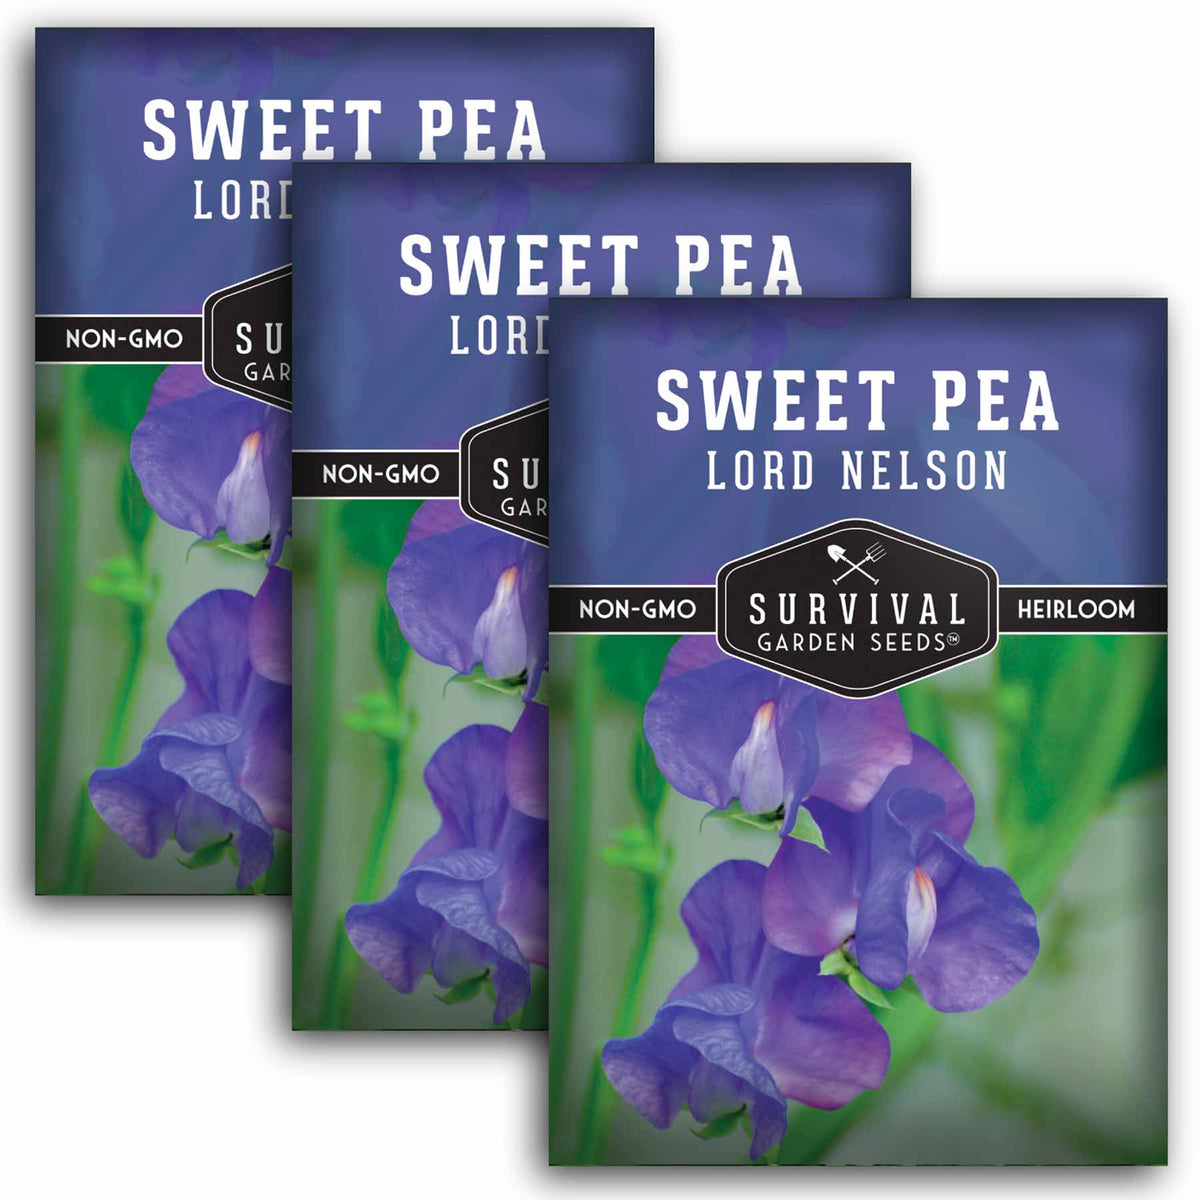 3 packets of Lord Nelson Sweet Pea seeds